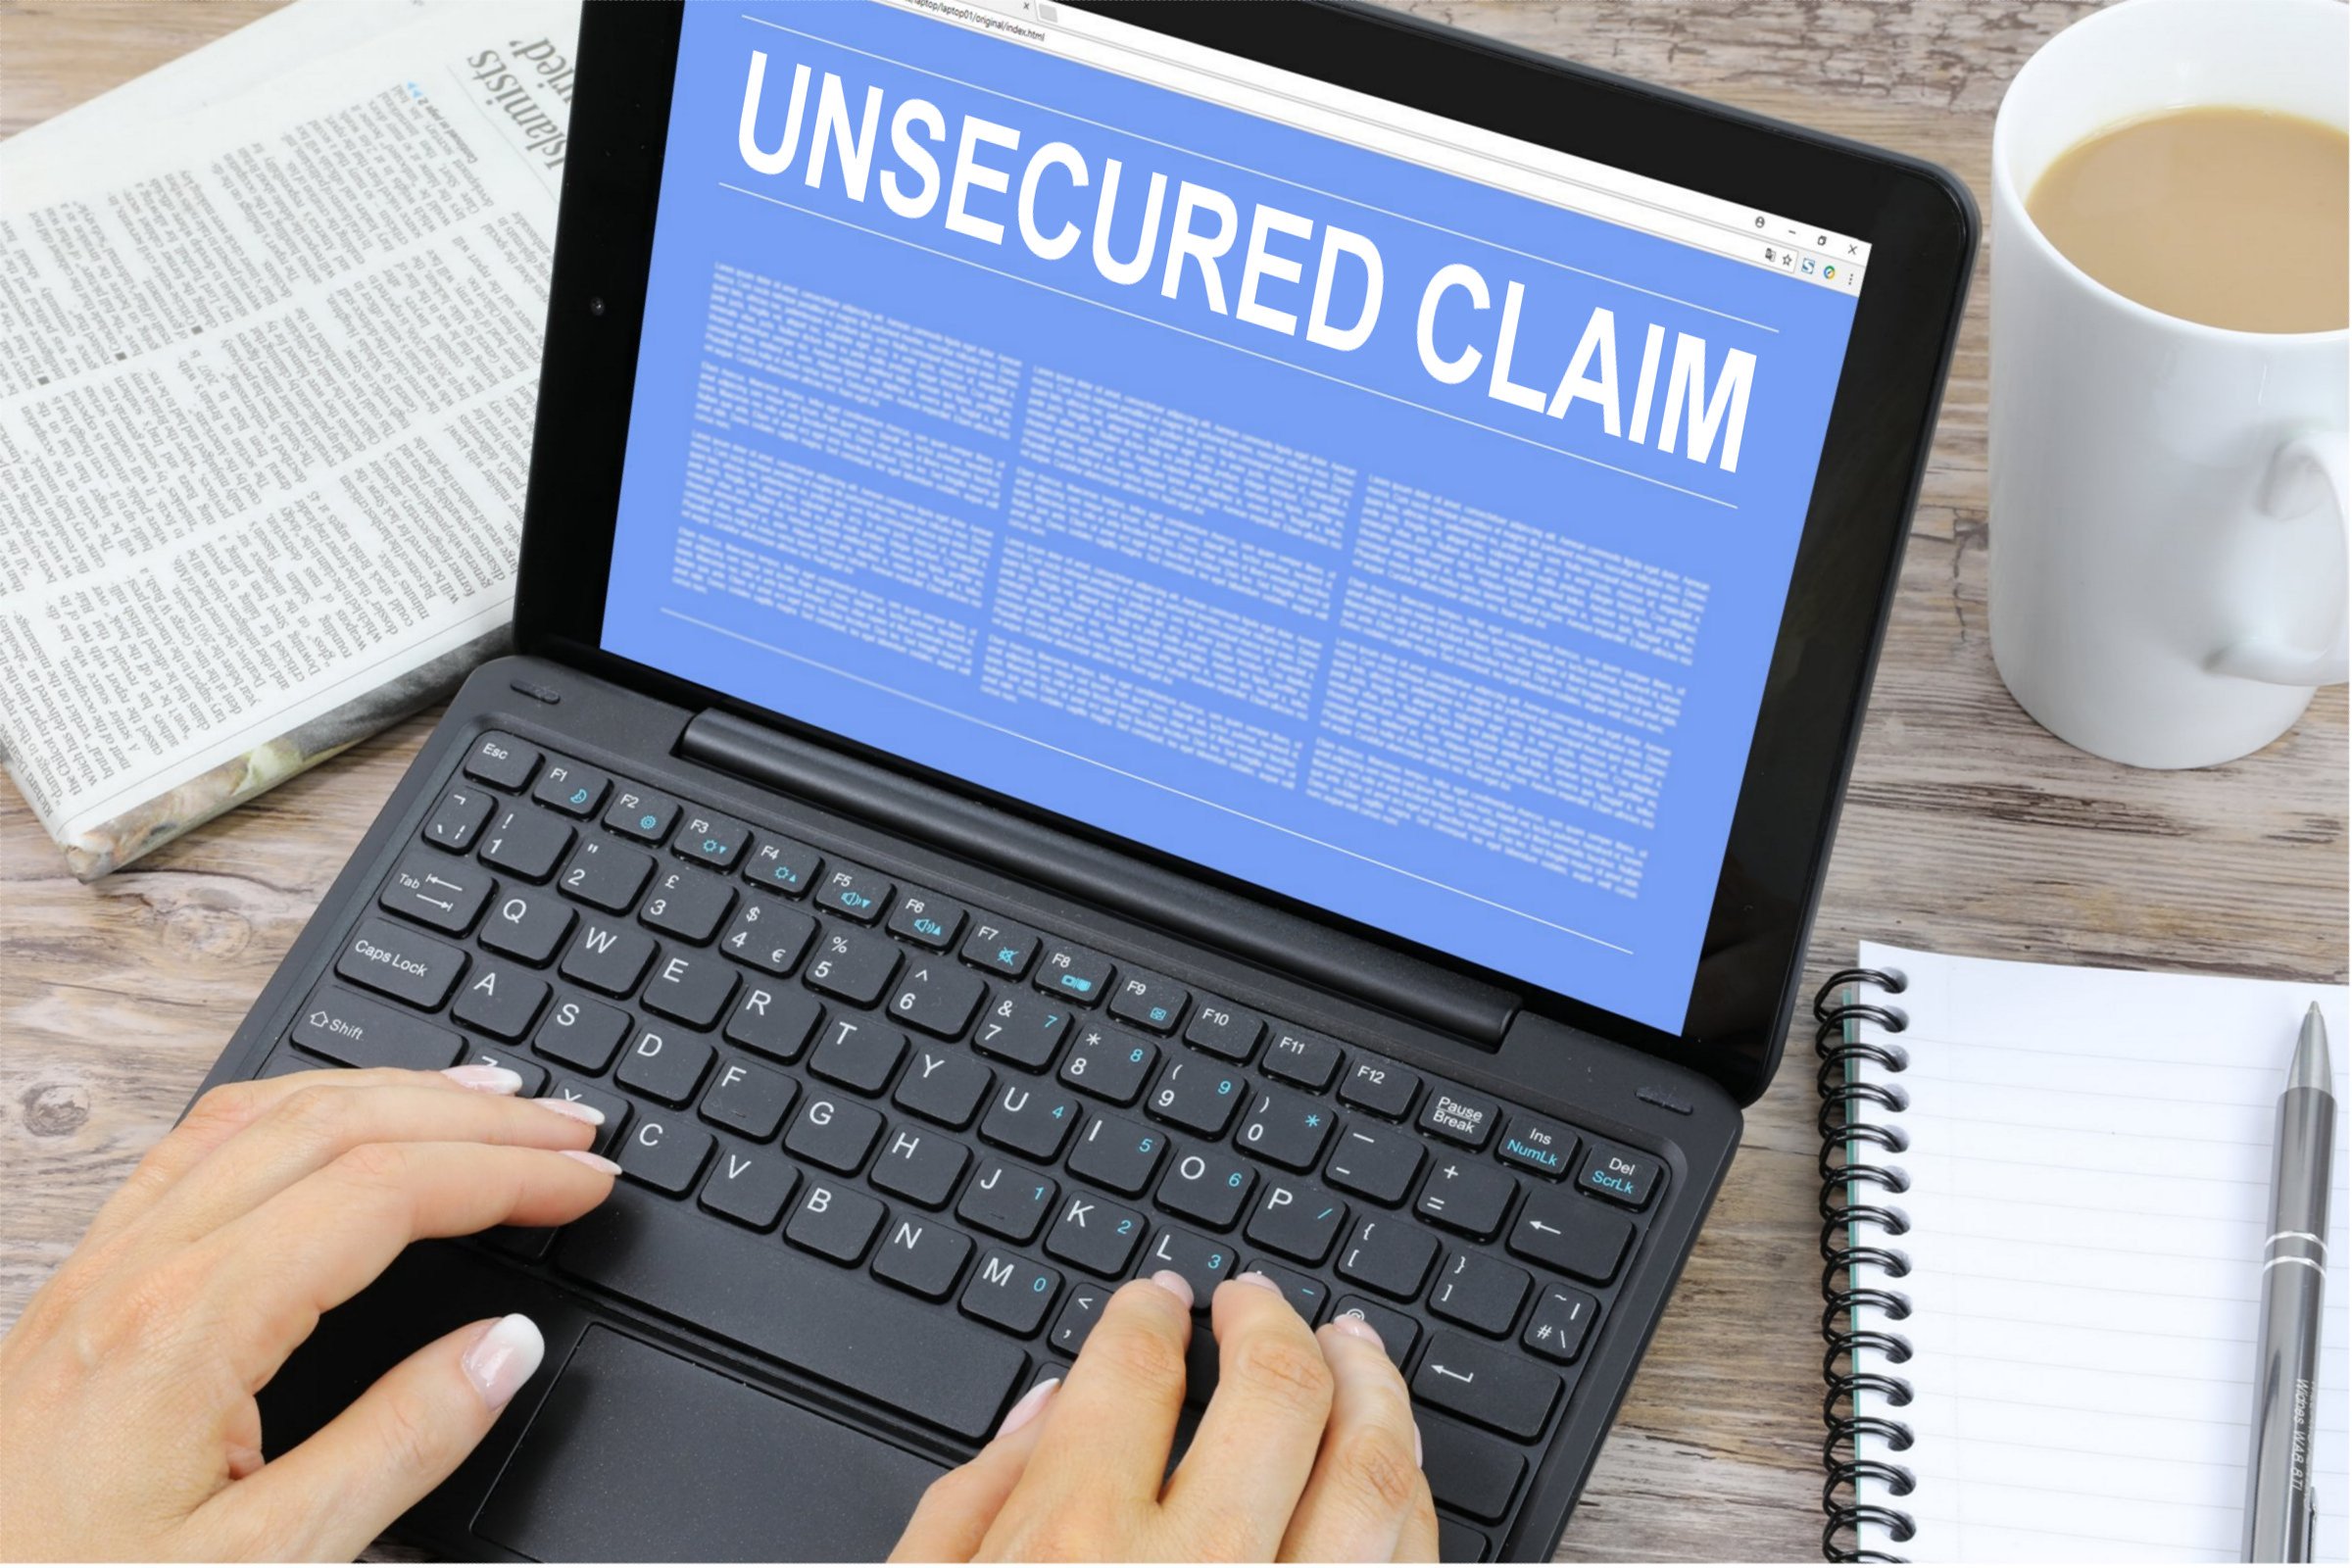 Unsecured Claim